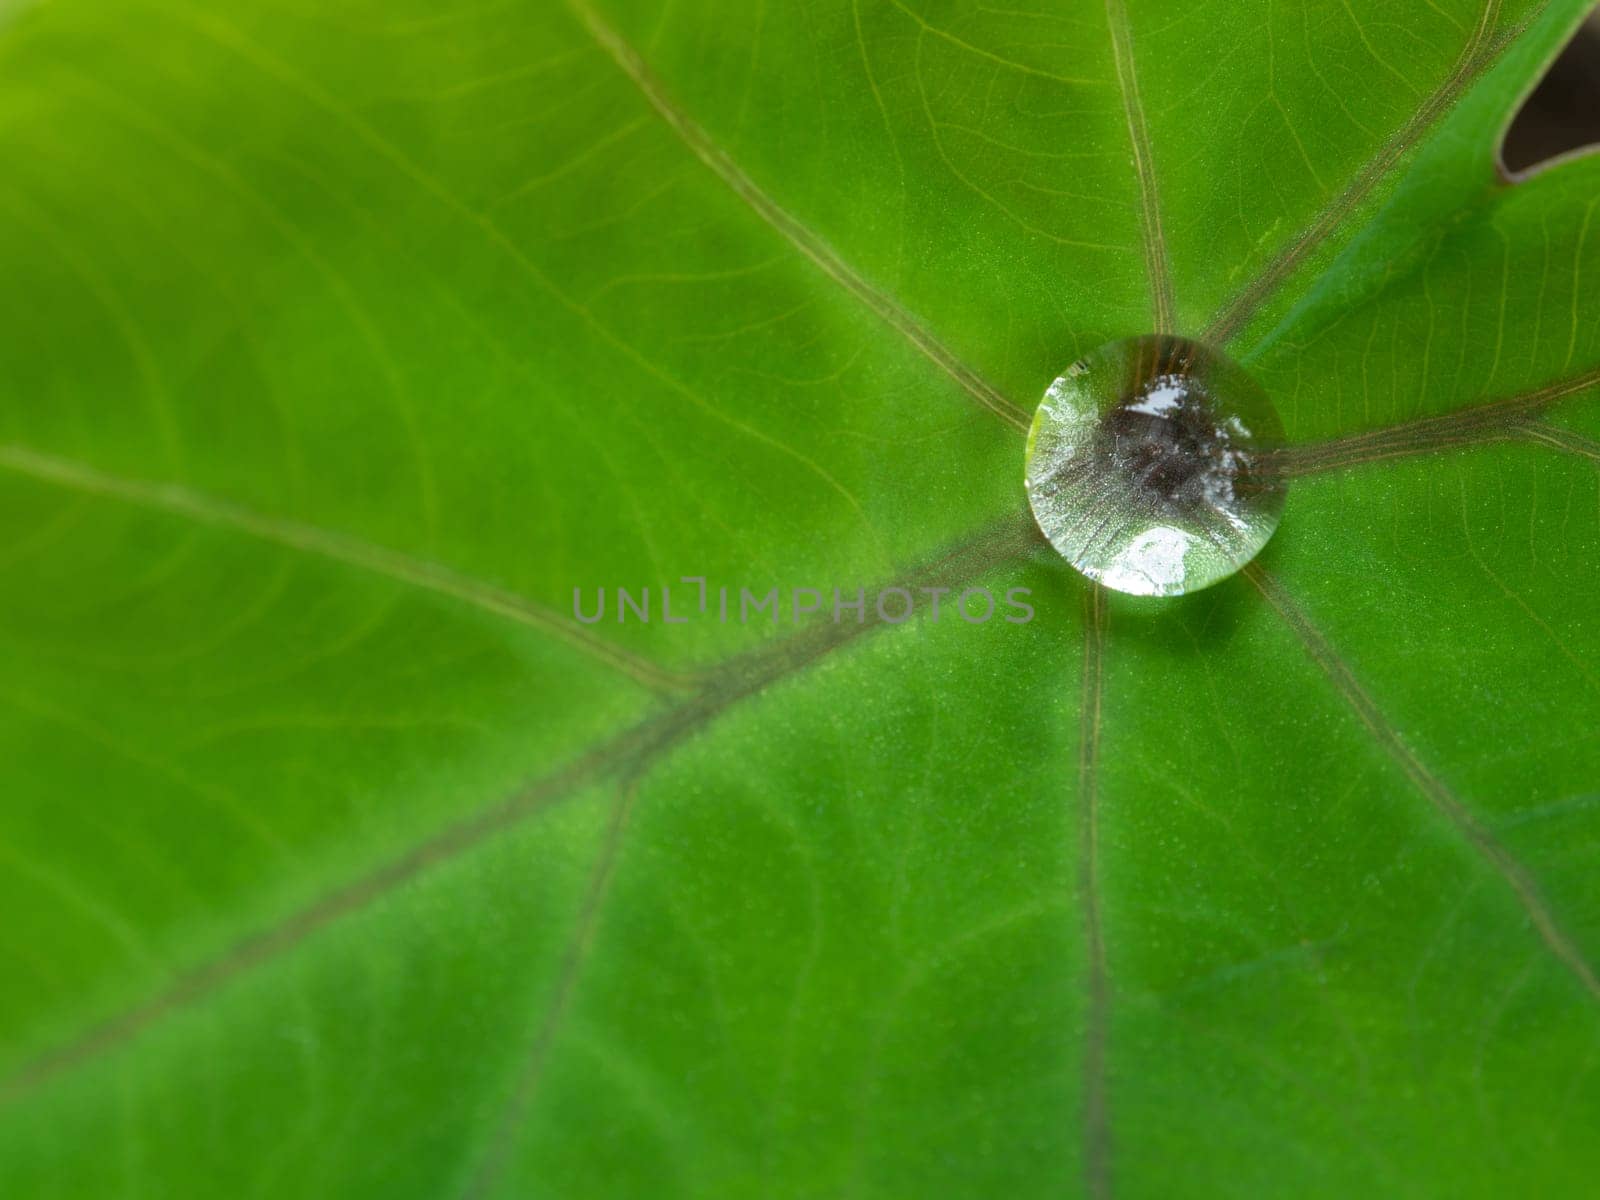 The Droplet water on the colocasia leaf by Satakorn